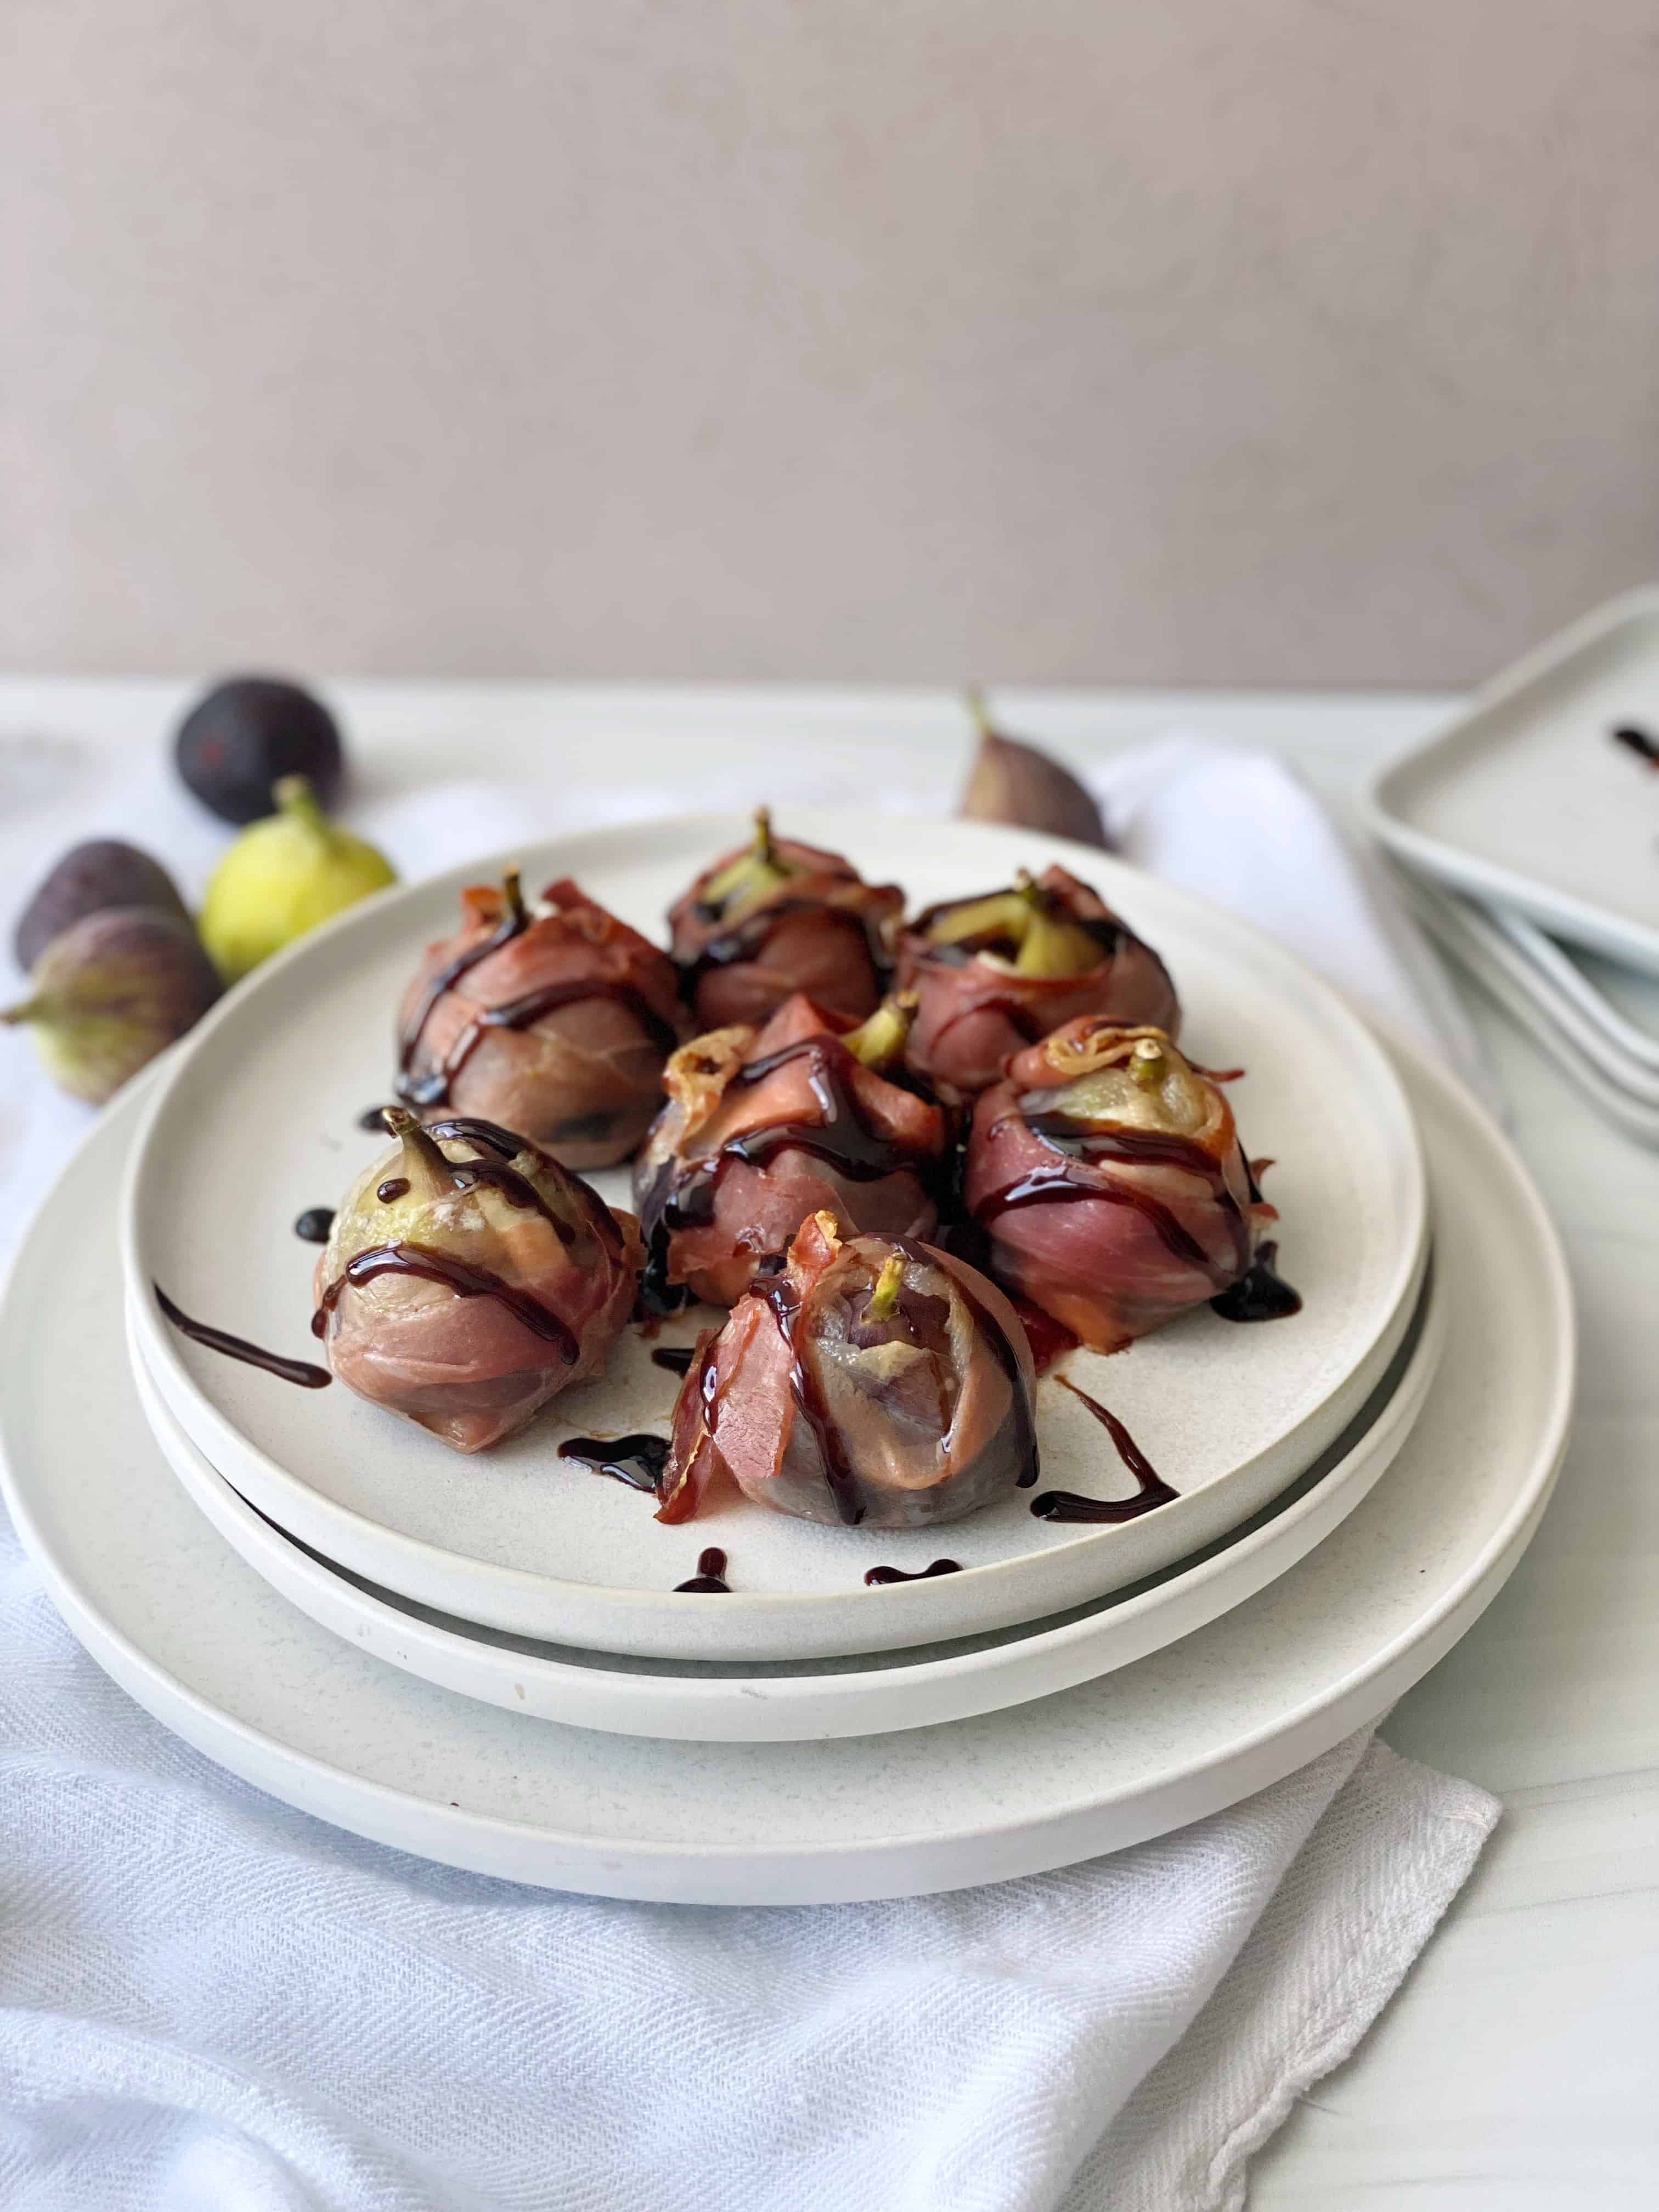 Baked Figs with Goat Cheese, Prosciutto, and Balsamic Glaze